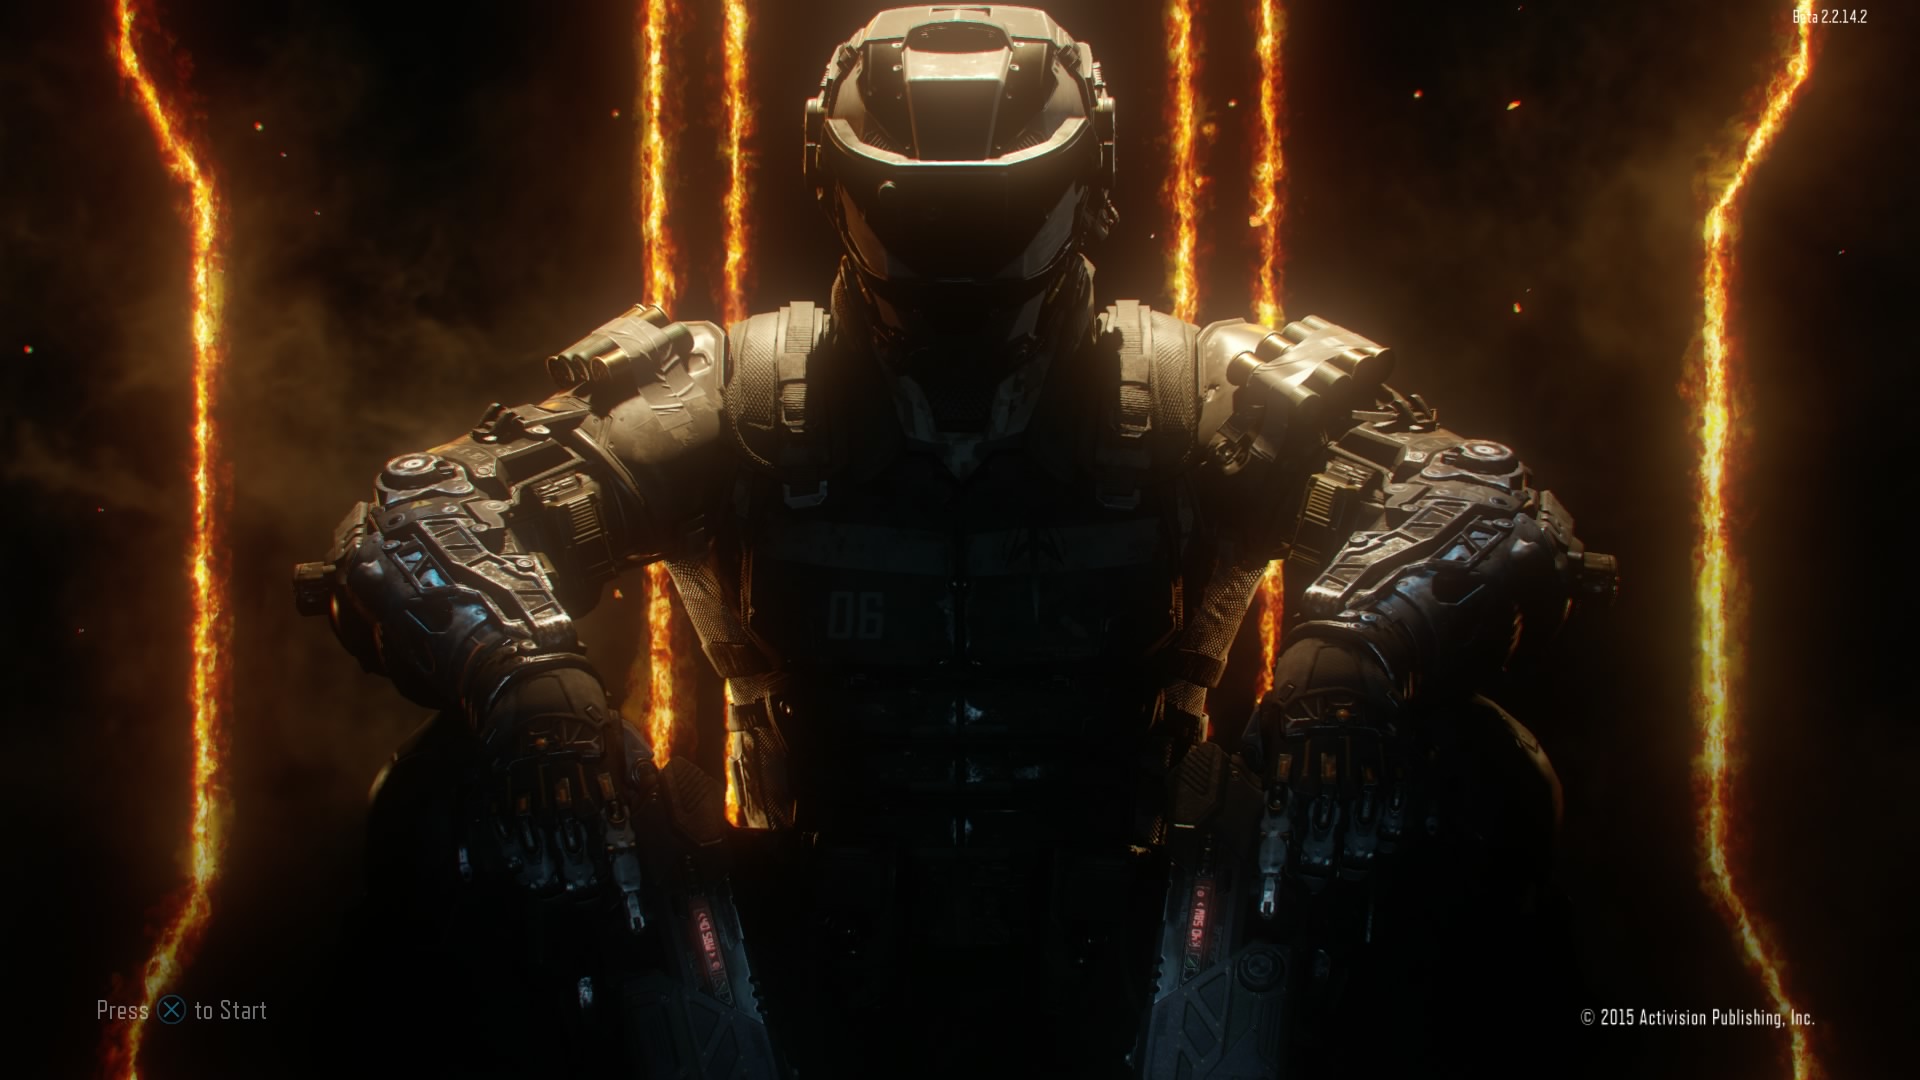 wallpapers de call of duty black ops 3,action adventure game,pc game,movie,action figure,action film